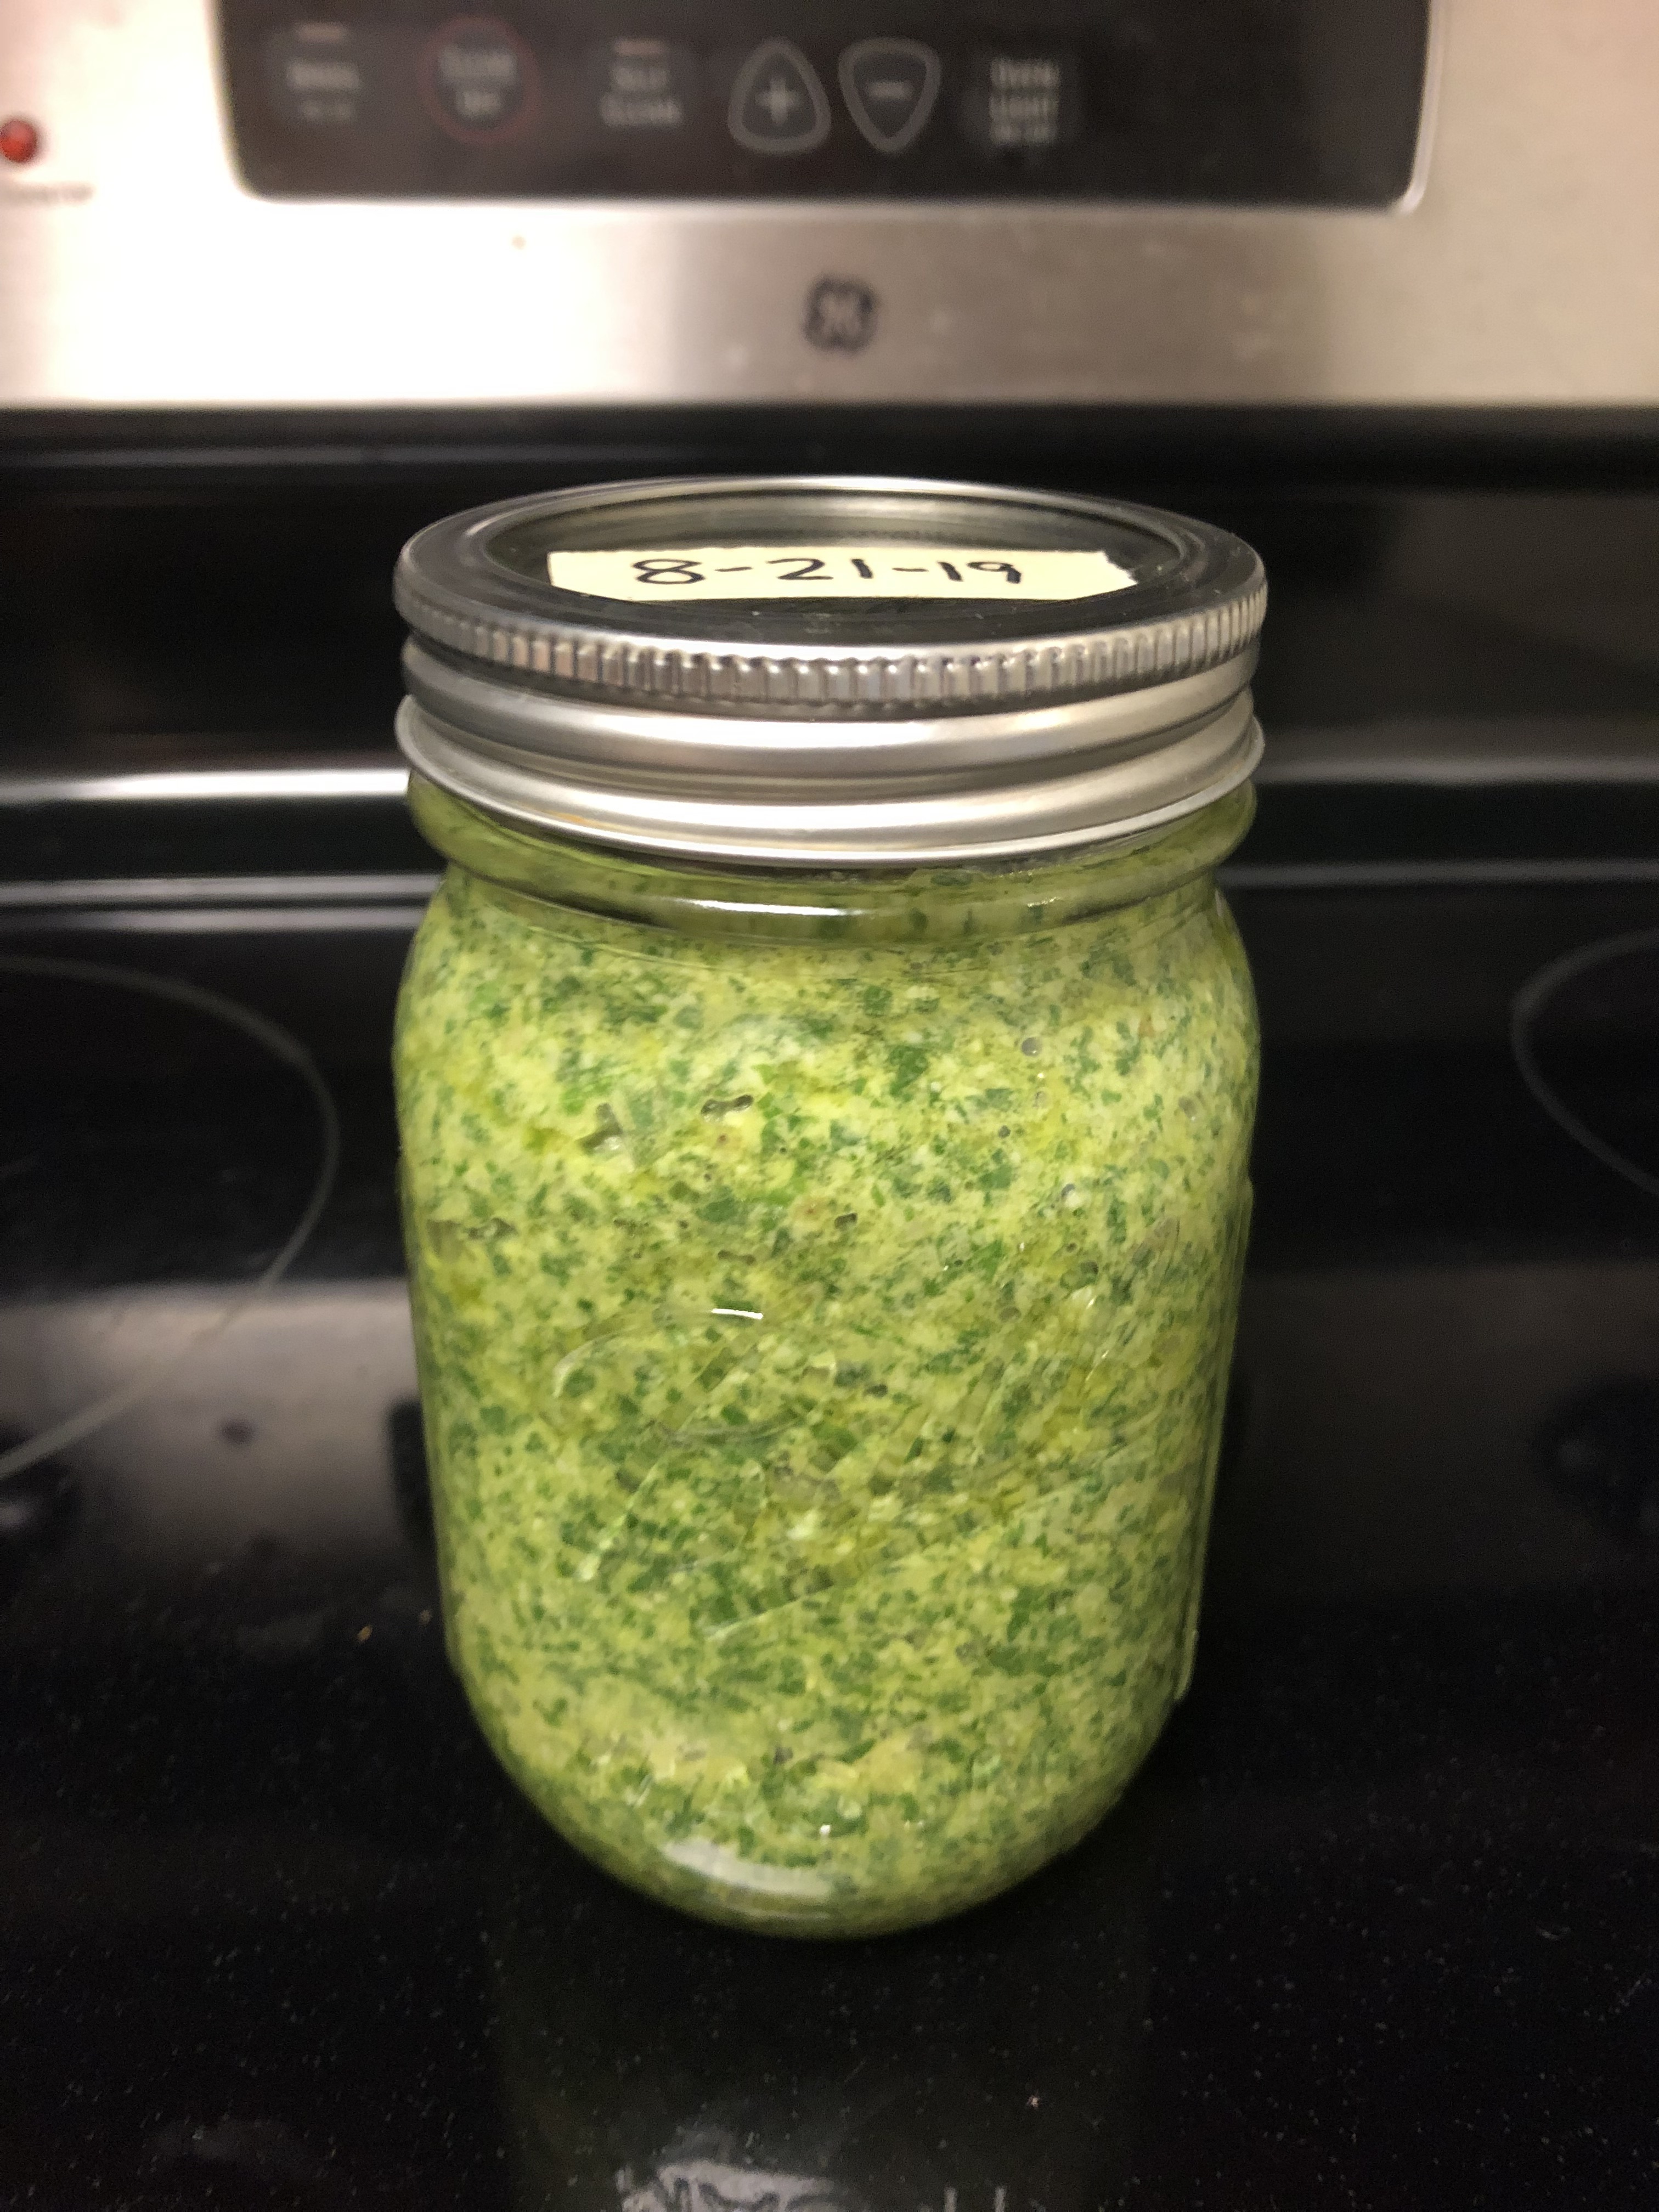 Jarred pesto. One jar requires double the ingredients listed.